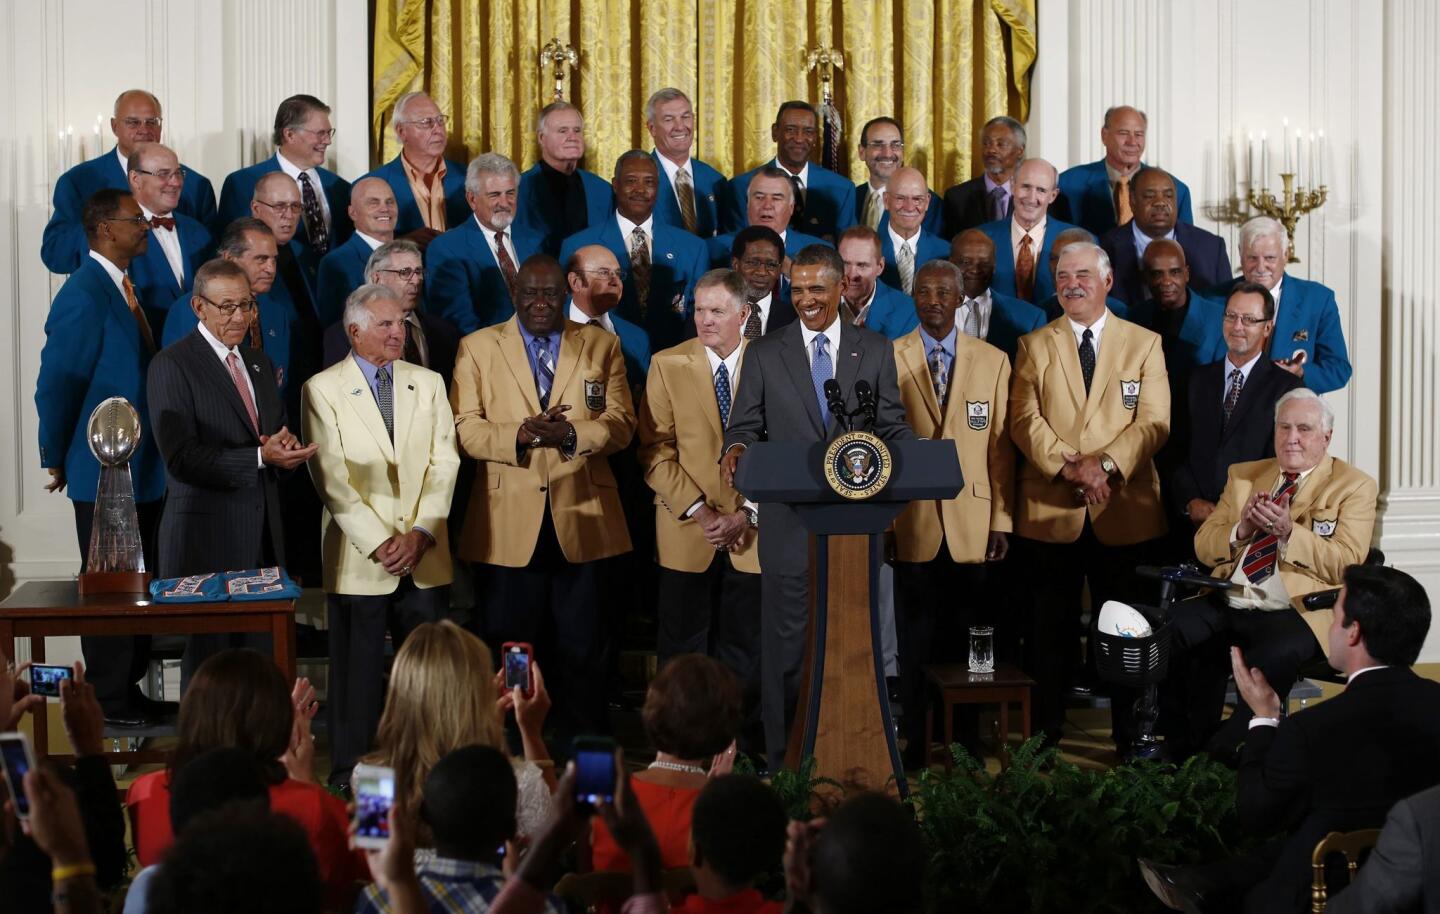 U.S. President Obama honors the 1972 season NFL Super Bowl winning football team, the Miami Dolphins in the East Room of the White House in Washington,